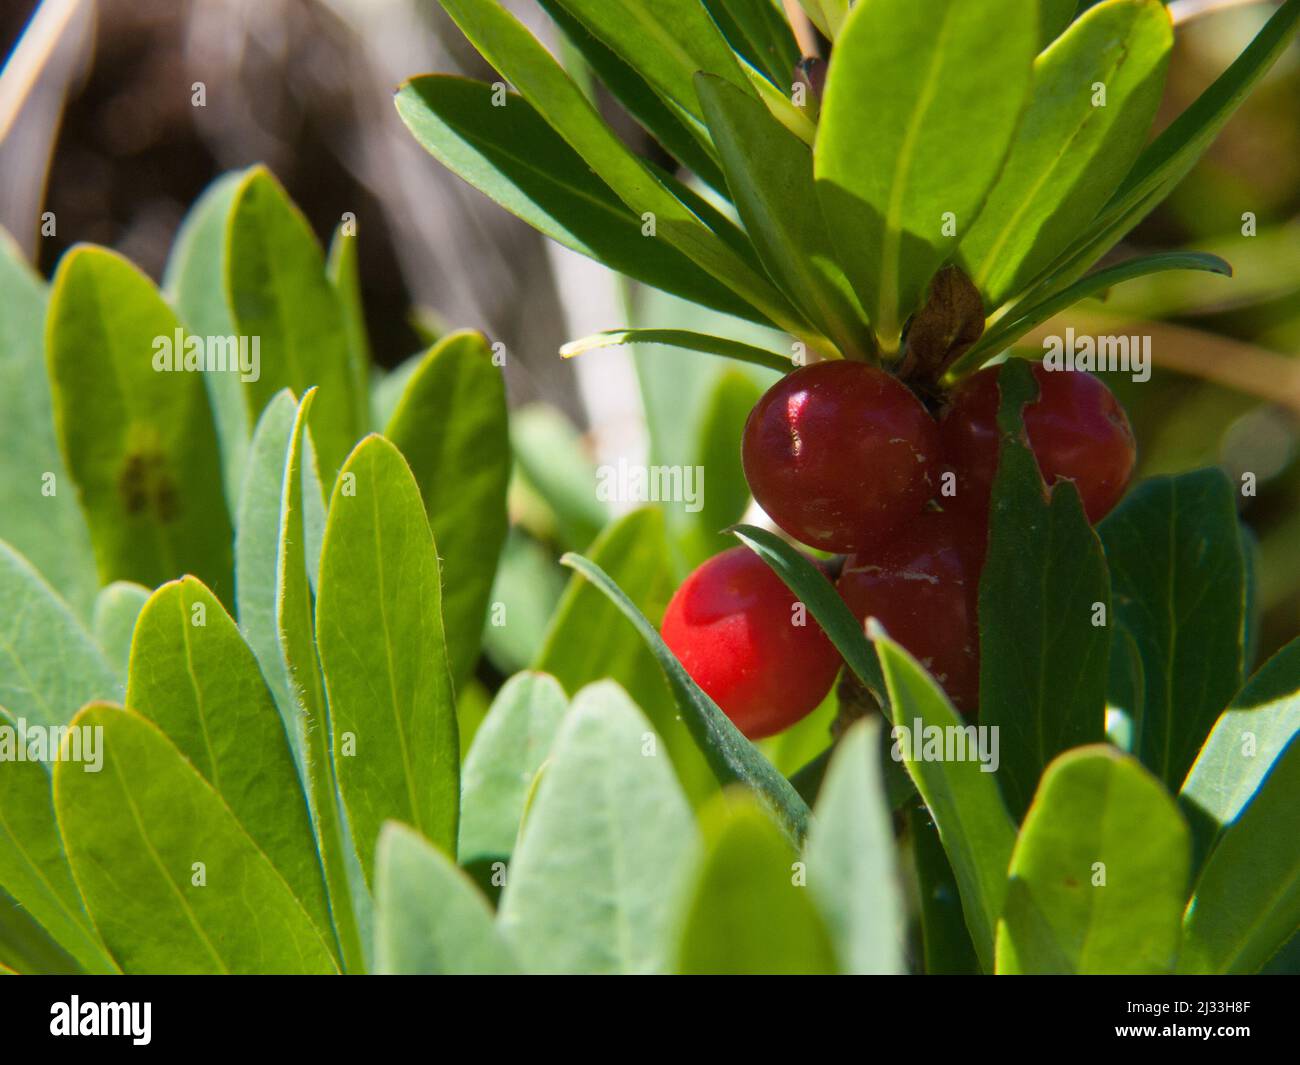 The red poisonous berries and green leaves of the mezereon (Daphne mezereum) Stock Photo